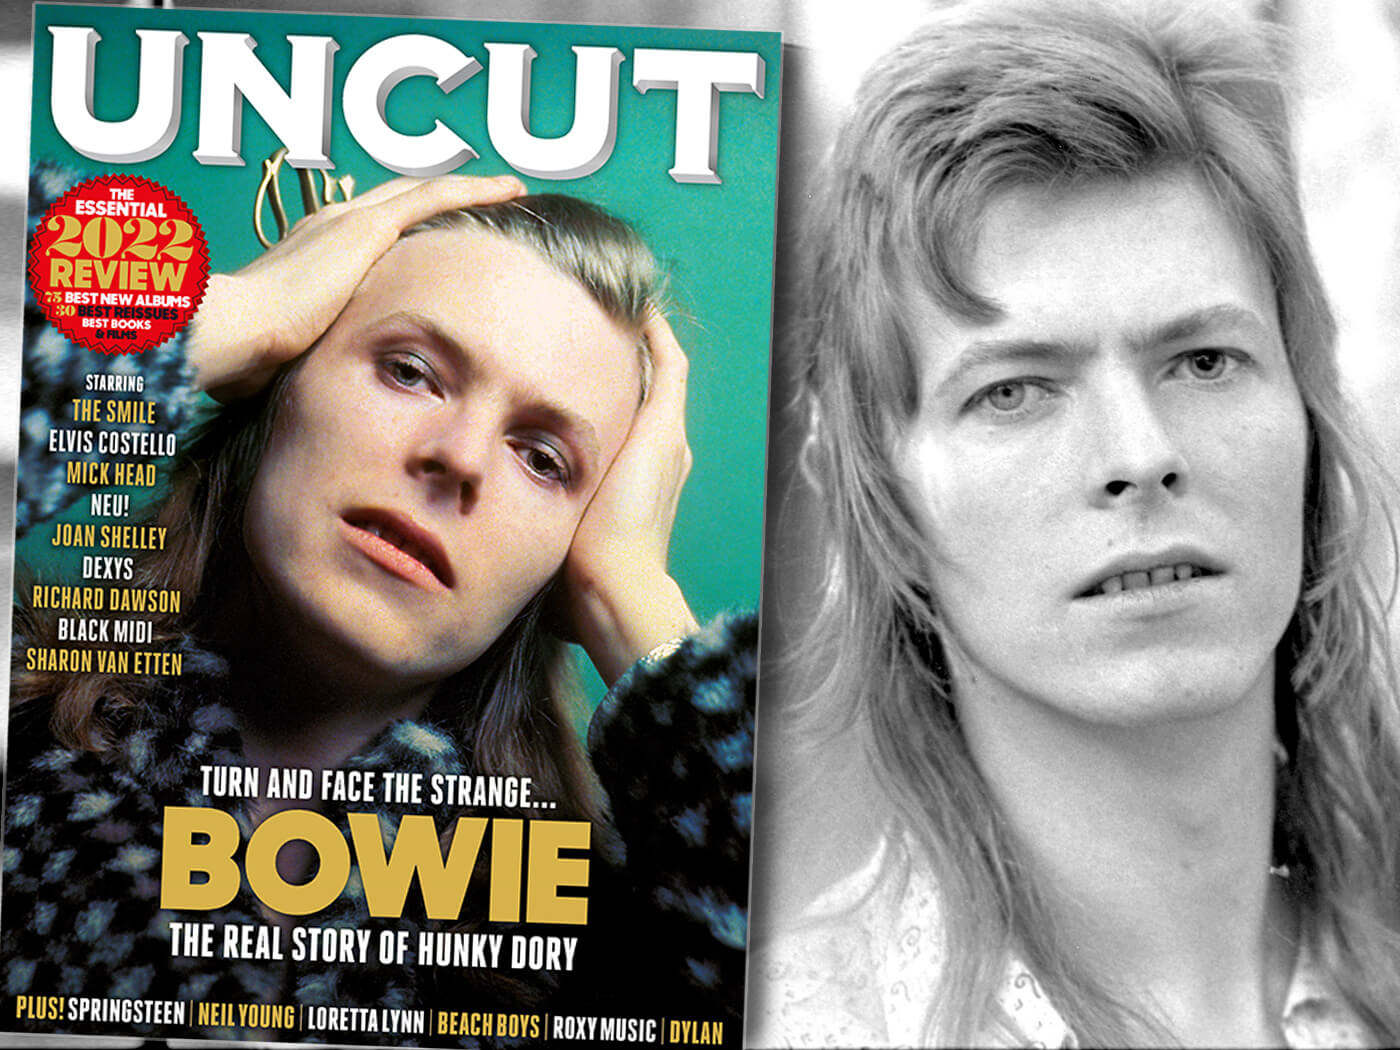 A look into David Bowie’s career defining album, Hunky Dory